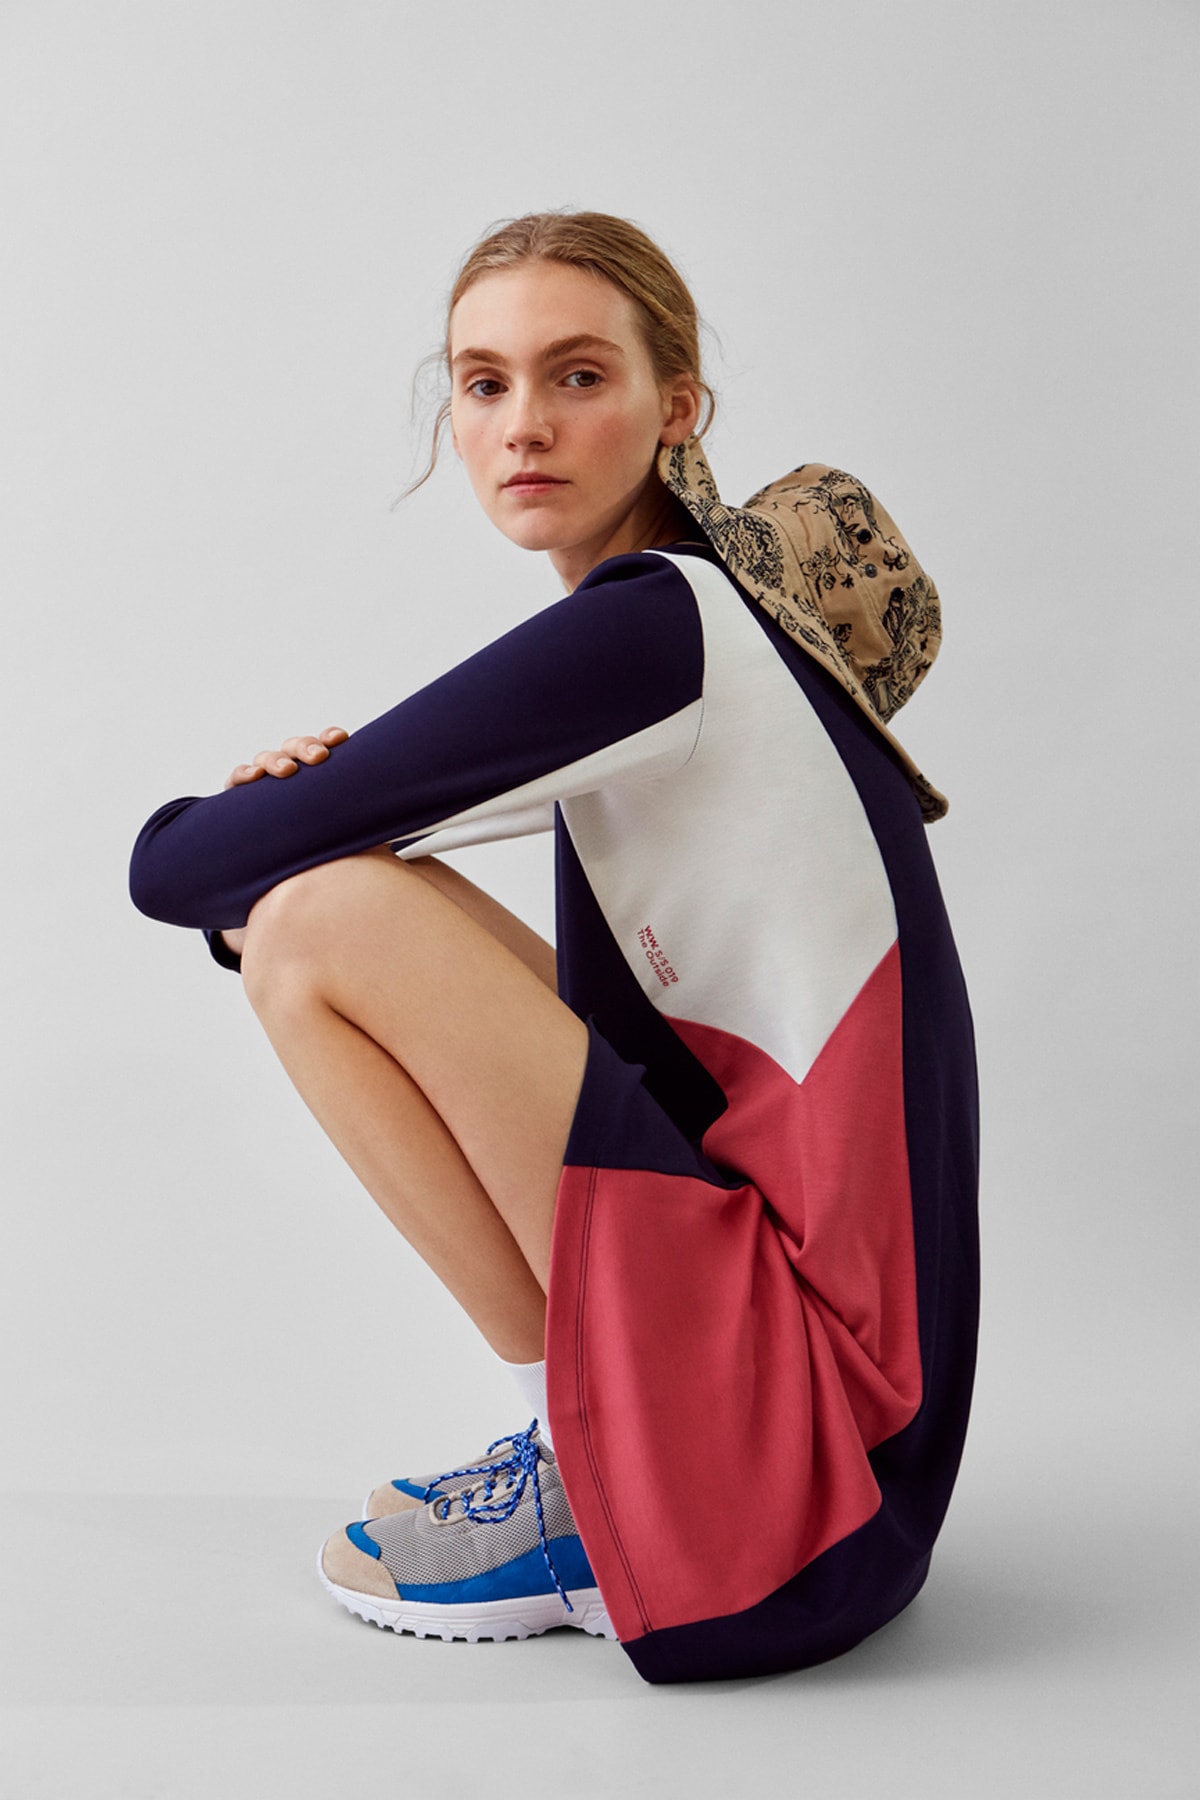 Wood Wood Spring Summer 2019 Outside Collection Lookbook Sporty Mandy Dress